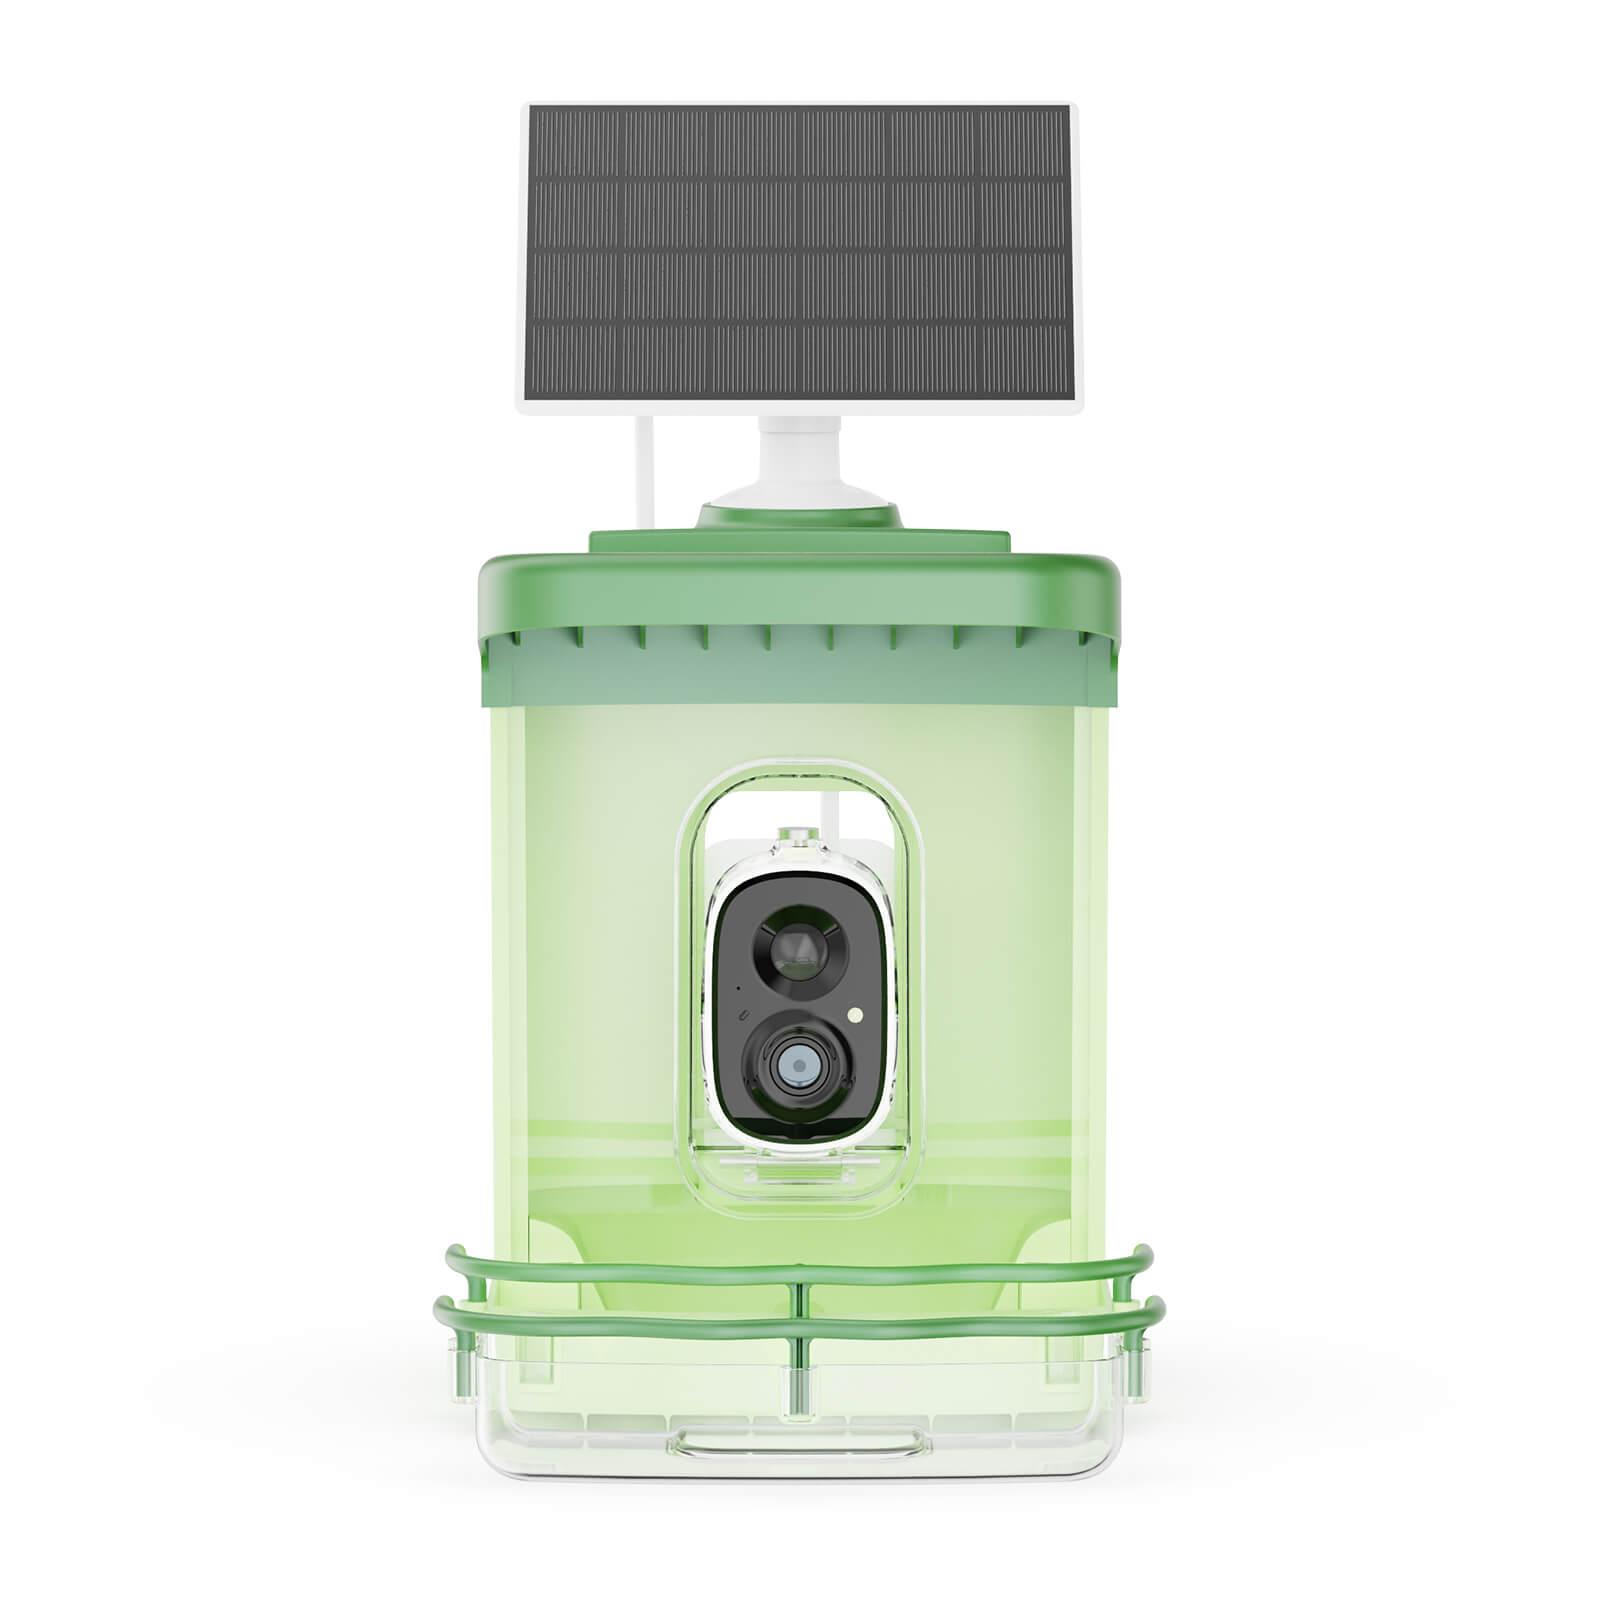 The main picture shows: natural color, green smart feeder, green design, best color for bird feeder, with solar energy, pvc bird feeder, bird feeder images, bird feeder video camera, best bird feeder camera, best smart bird feeder camera